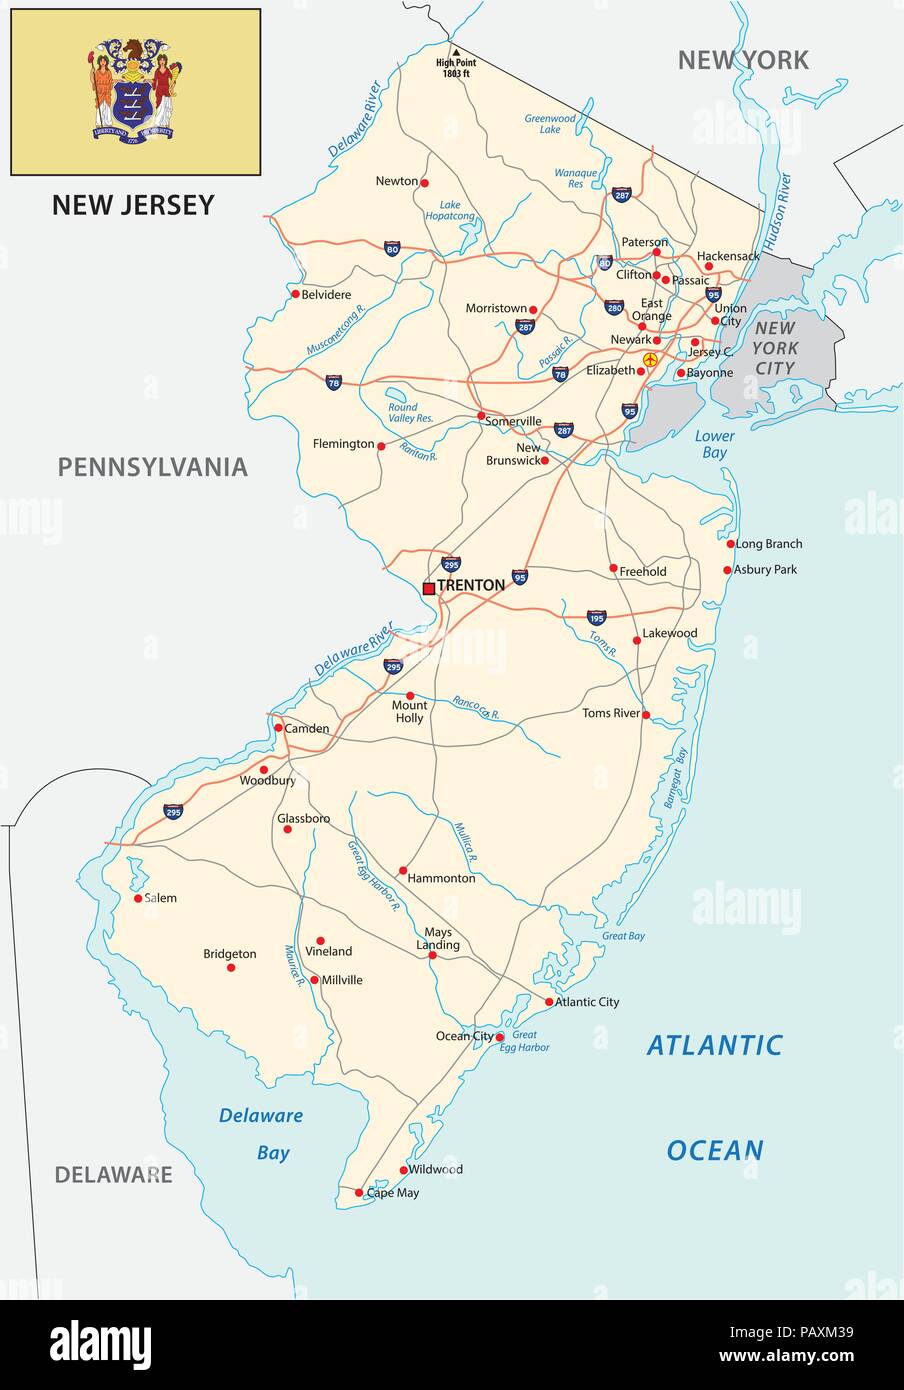 New Jersey road map mit Fahne Stock Vektor